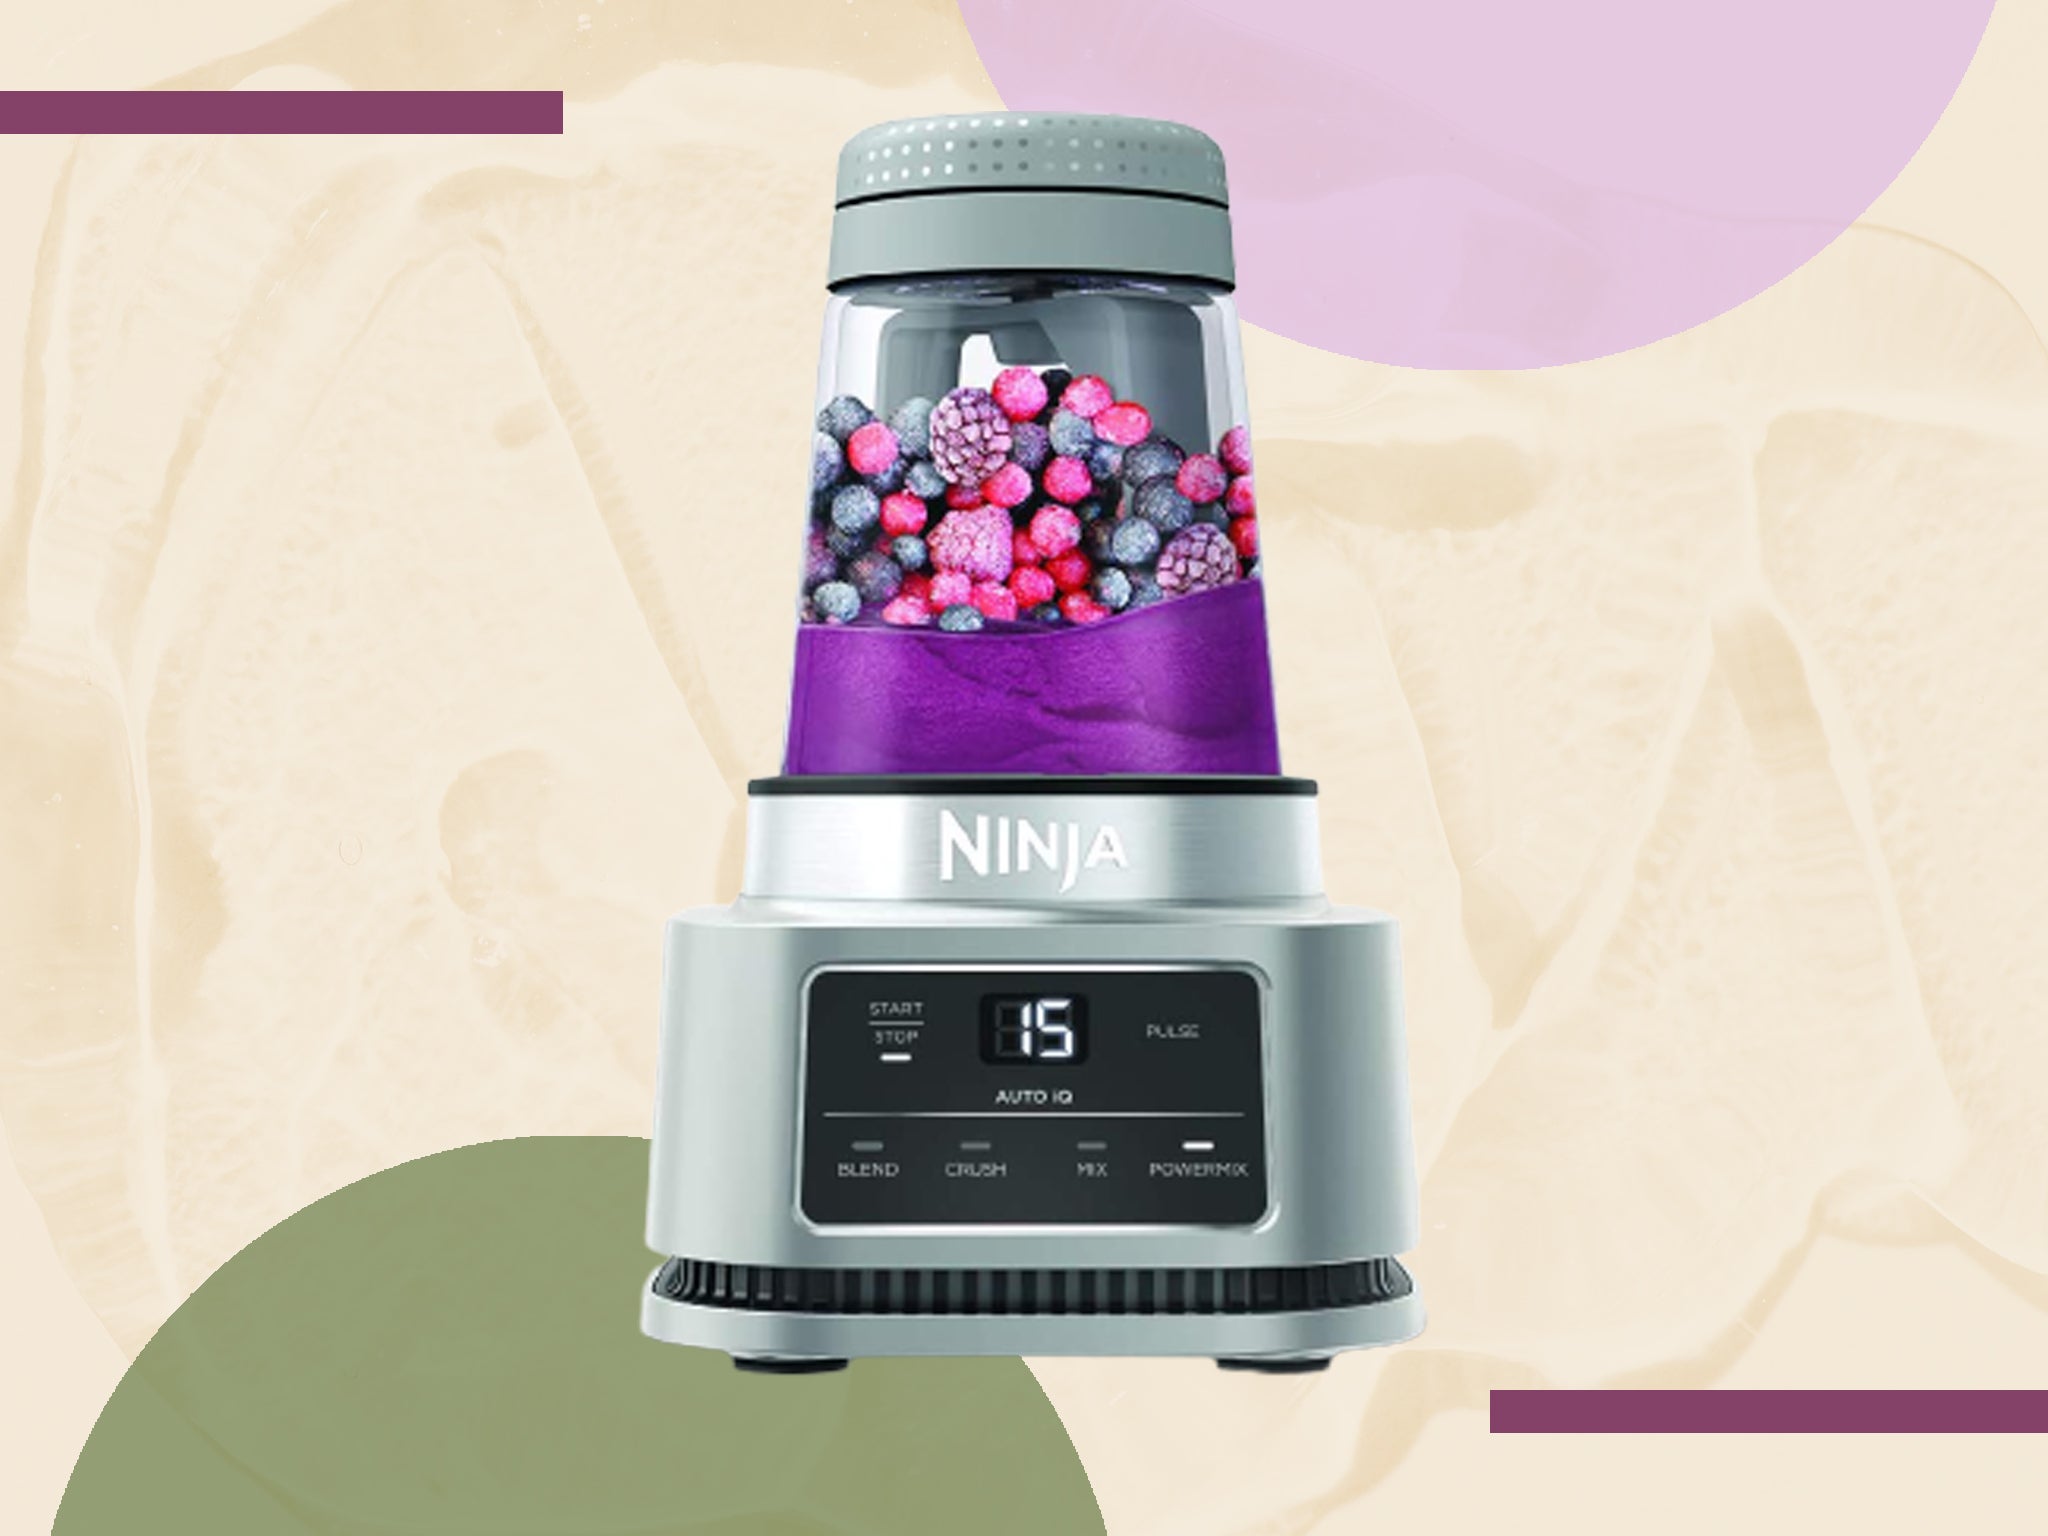 Ninja foodi power nutri blender 2-in-1 review: A smoother operator